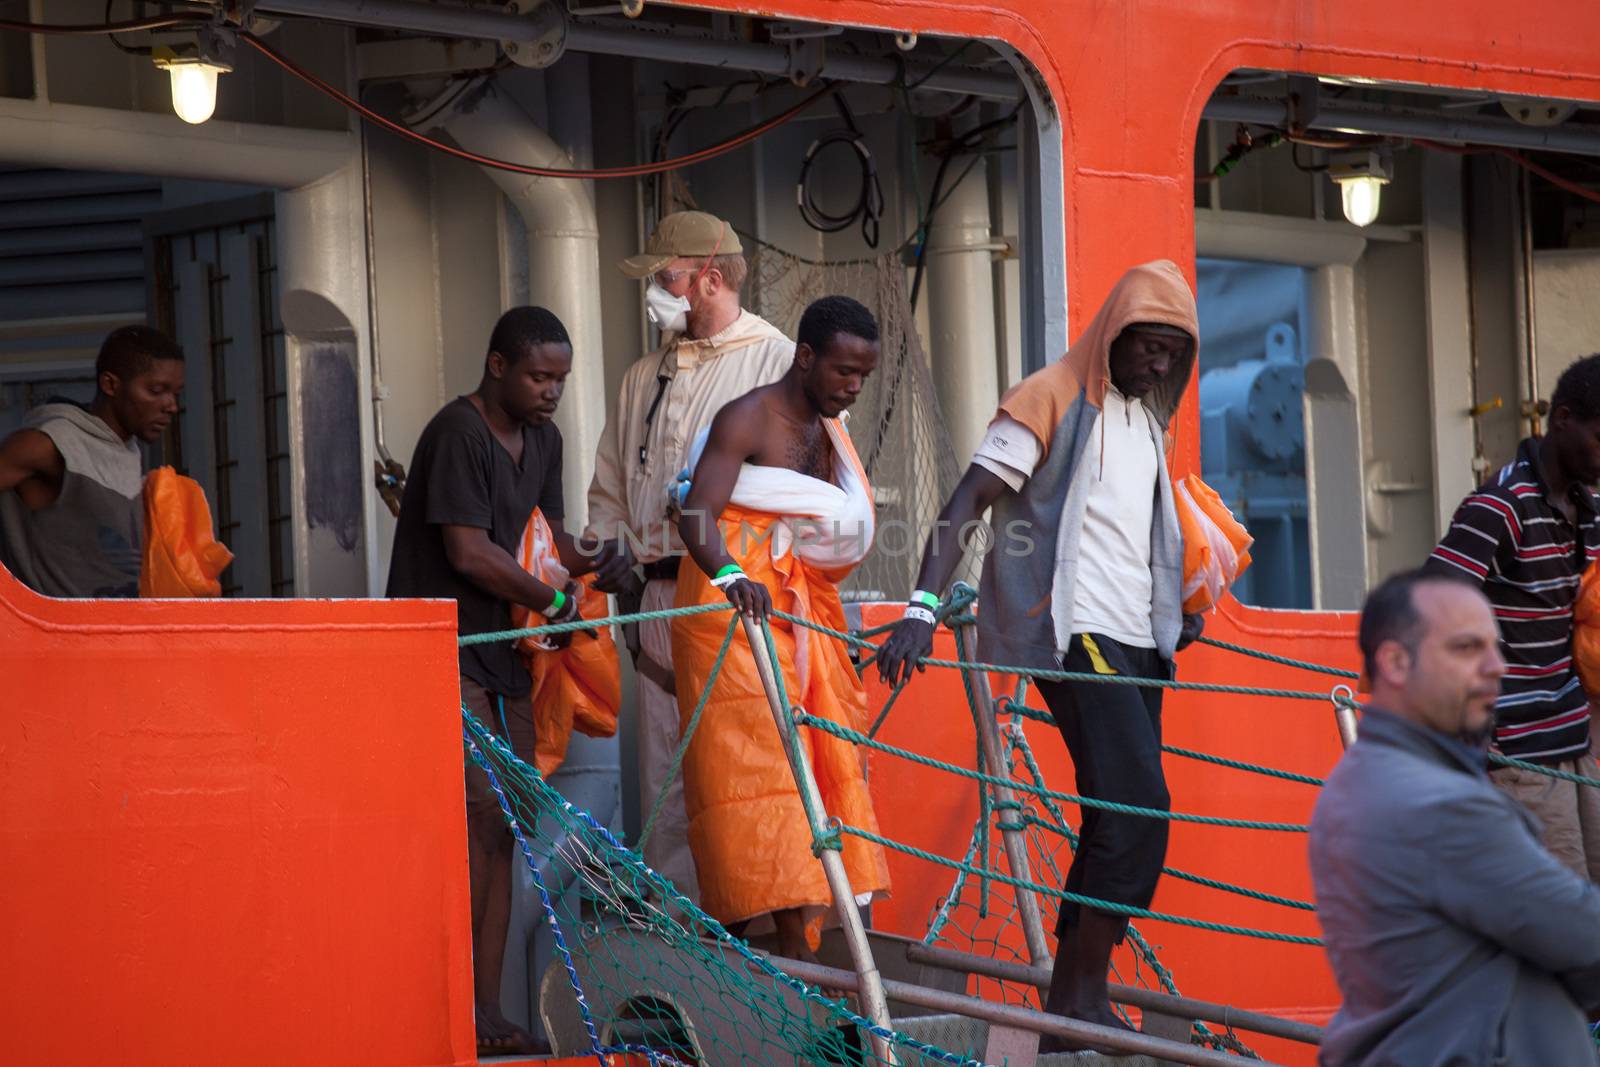 ITALY, Palermo: Migrants disembark from the Siem Pilot on April 13, 2016 in Palermo, Italy.The vessel has been a major transporter of migrants fleeing the Middle East and Africa to Europe. 